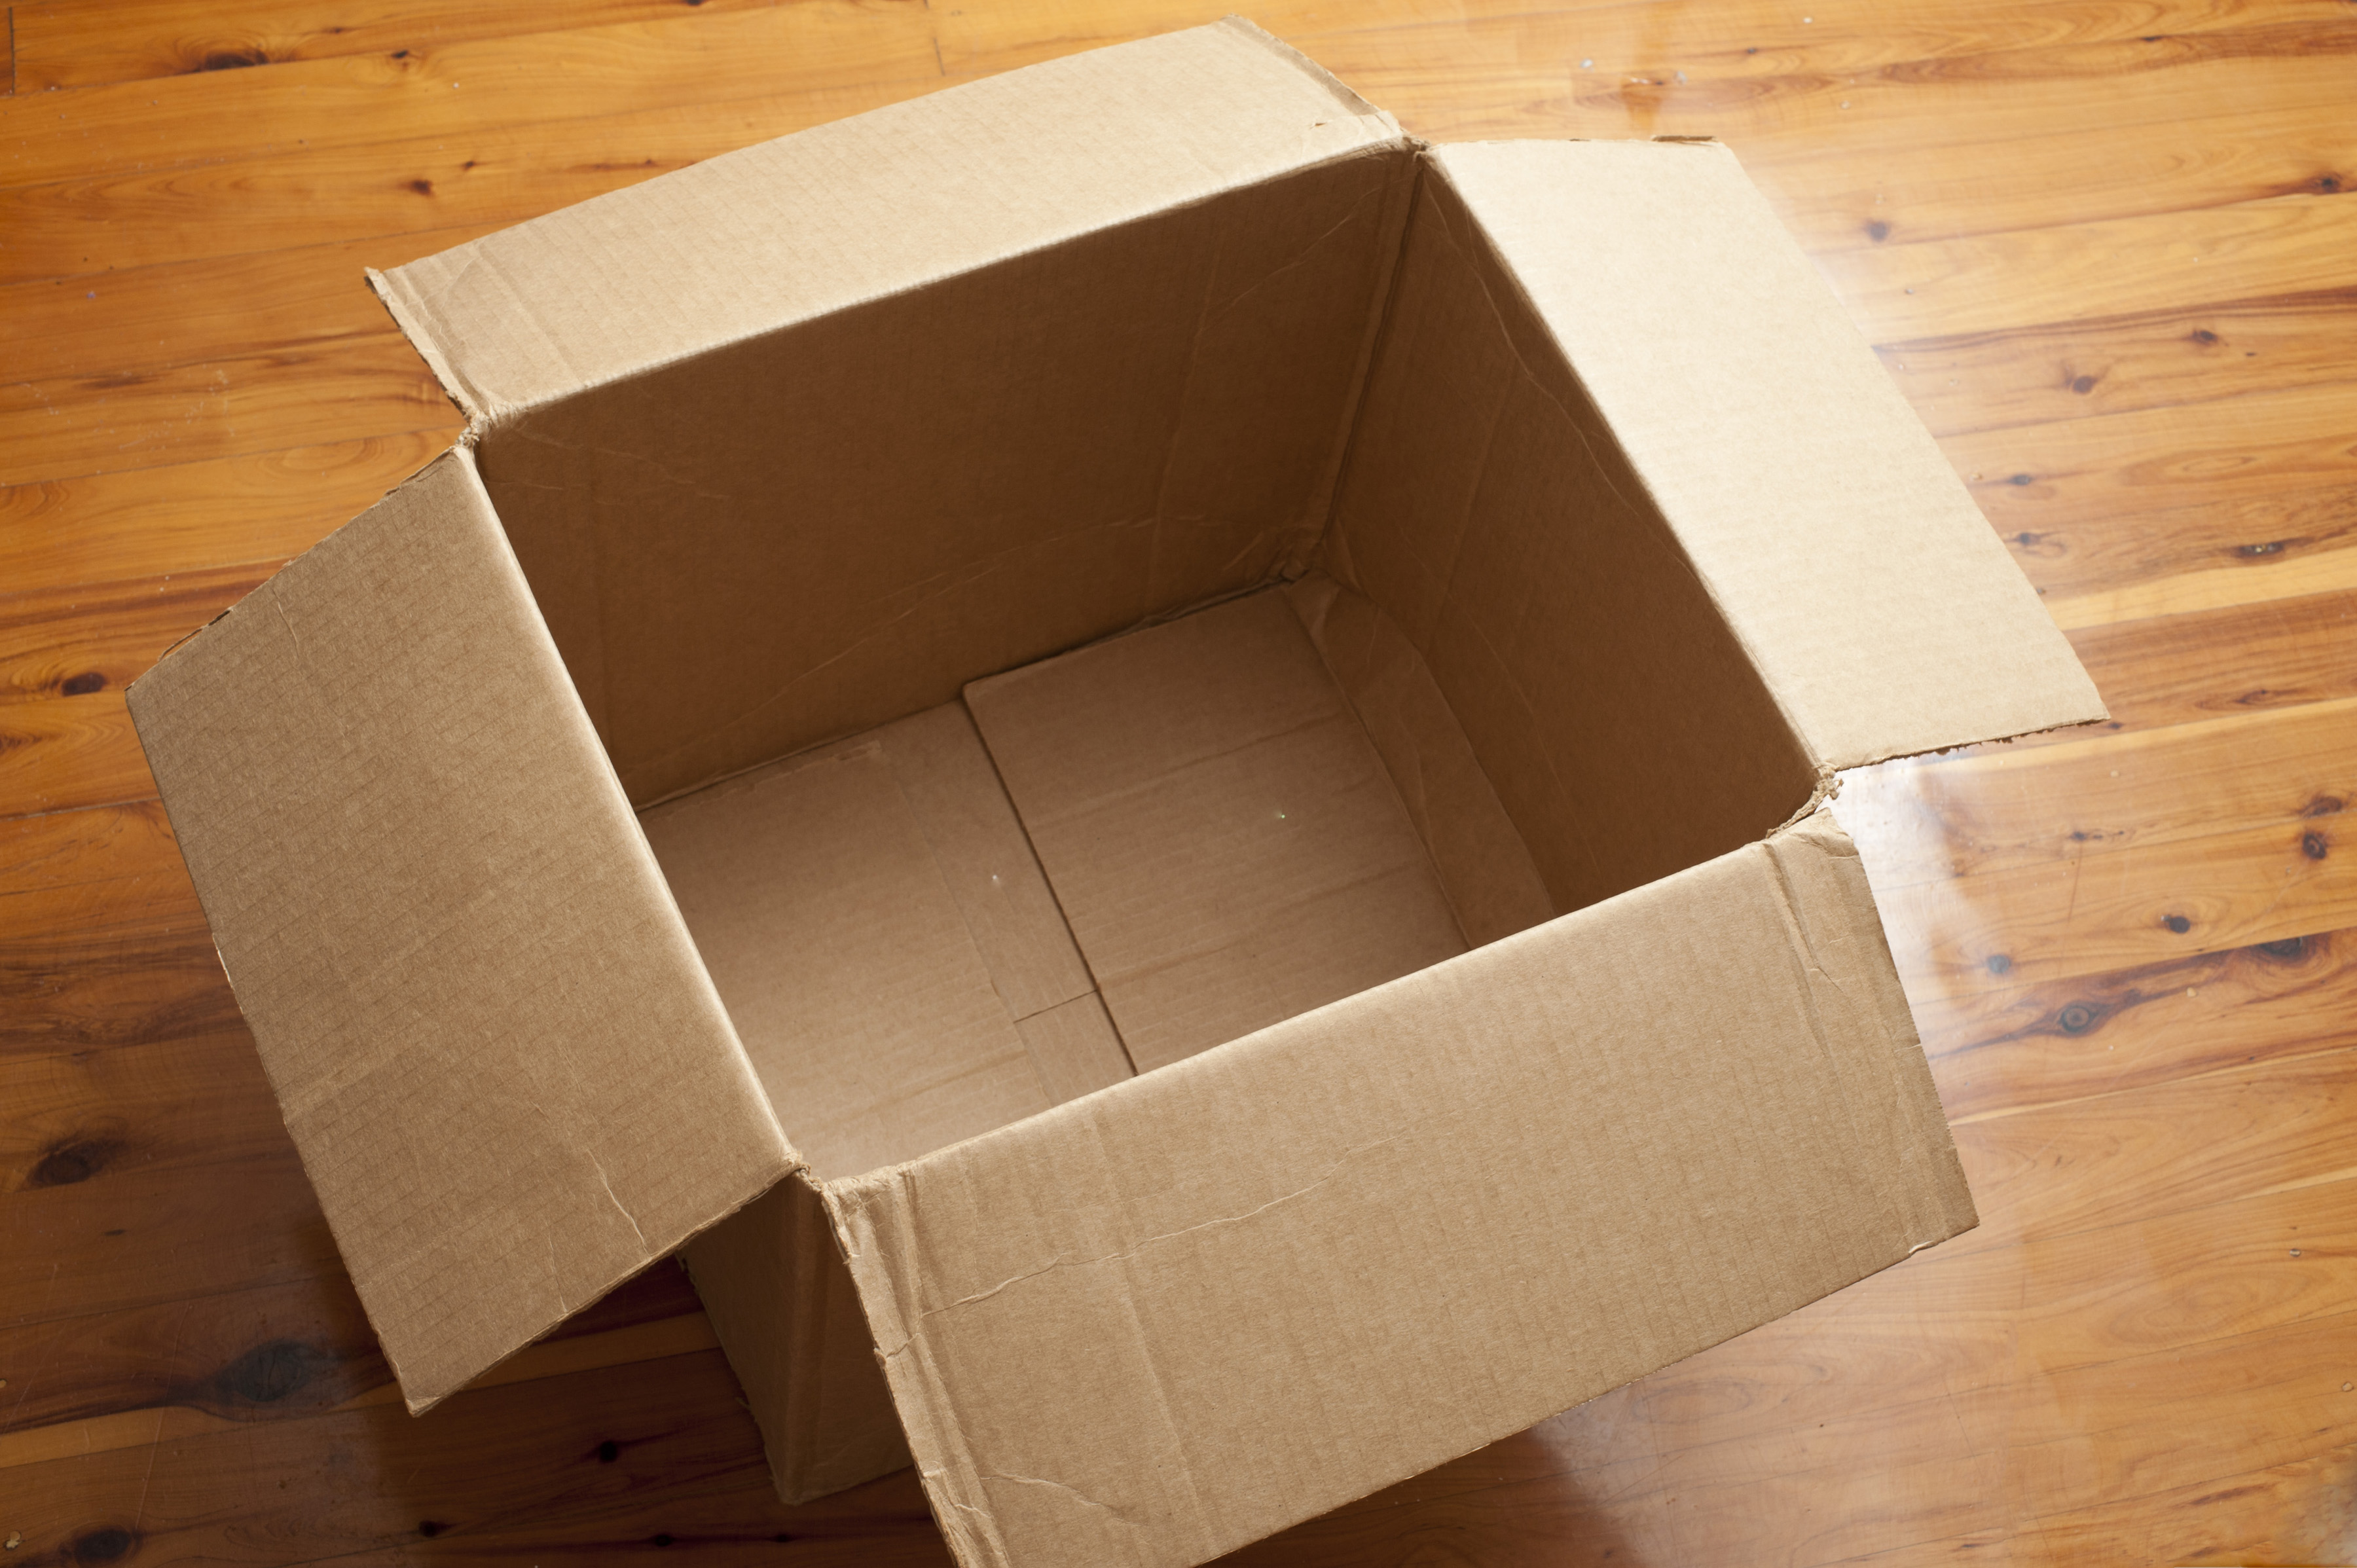 [Fuel] An empty box. Does it need to look unique to be ...
